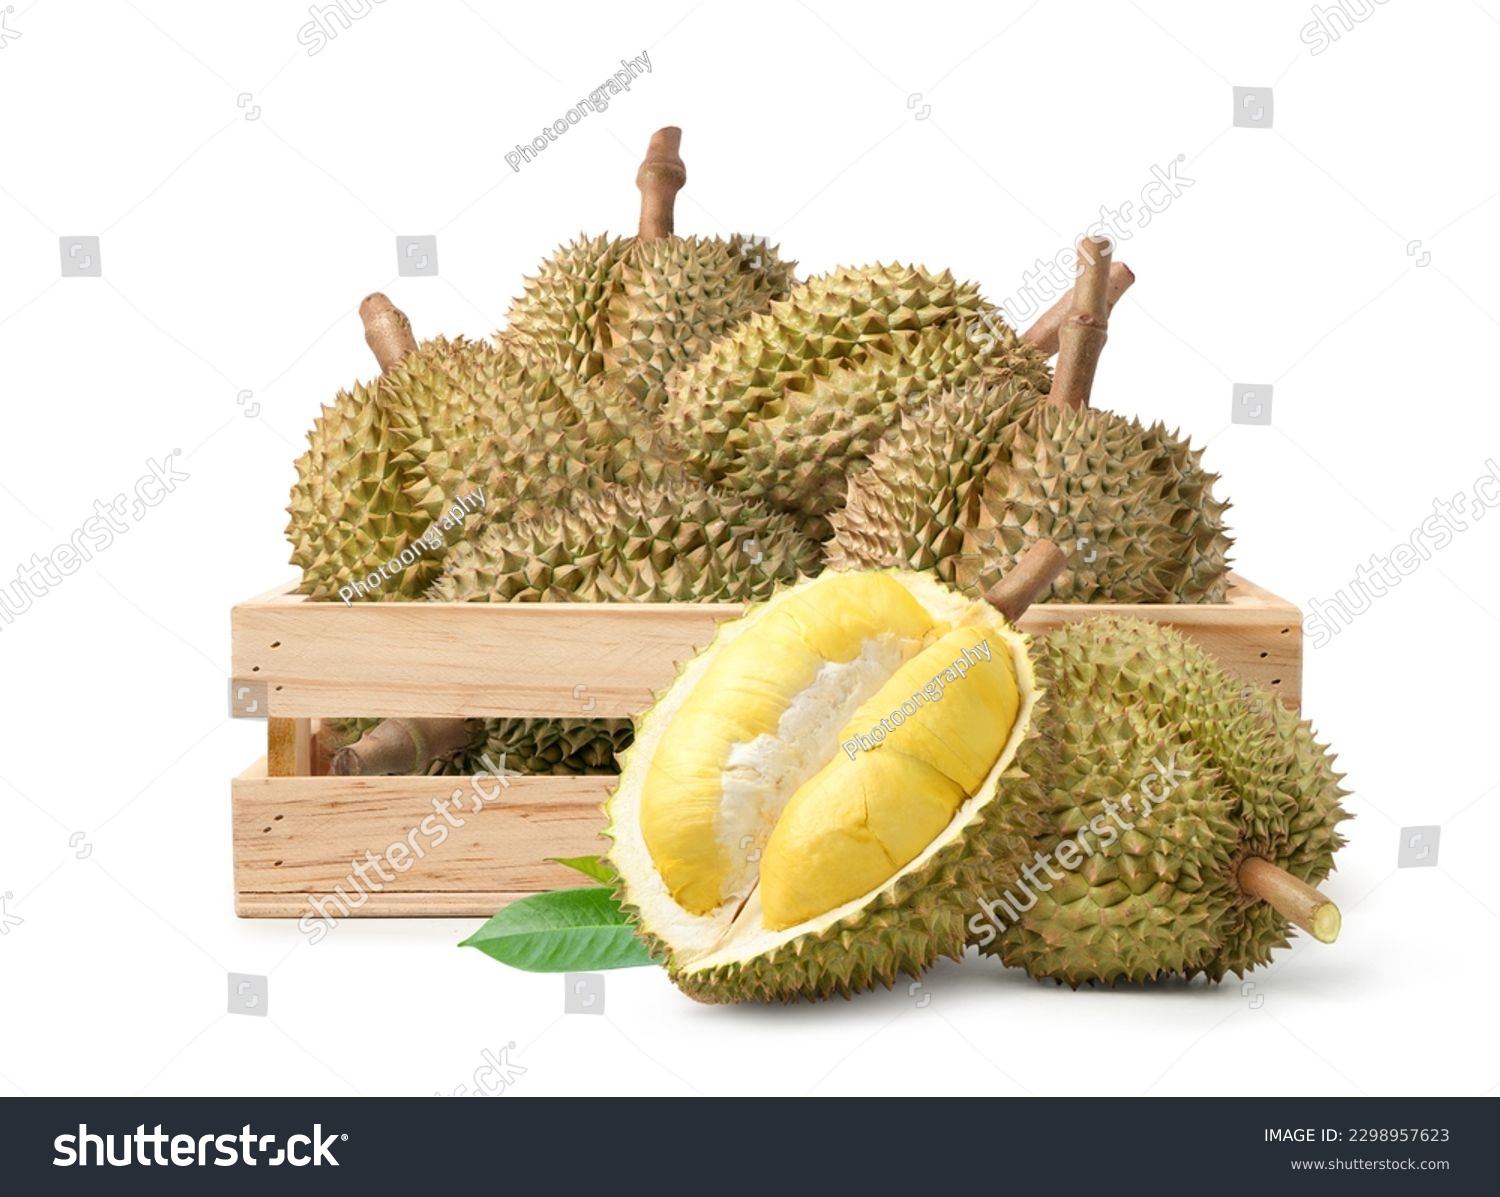 Durian fruits in wooden crate with cut in half isolate on white background.  #2298957623